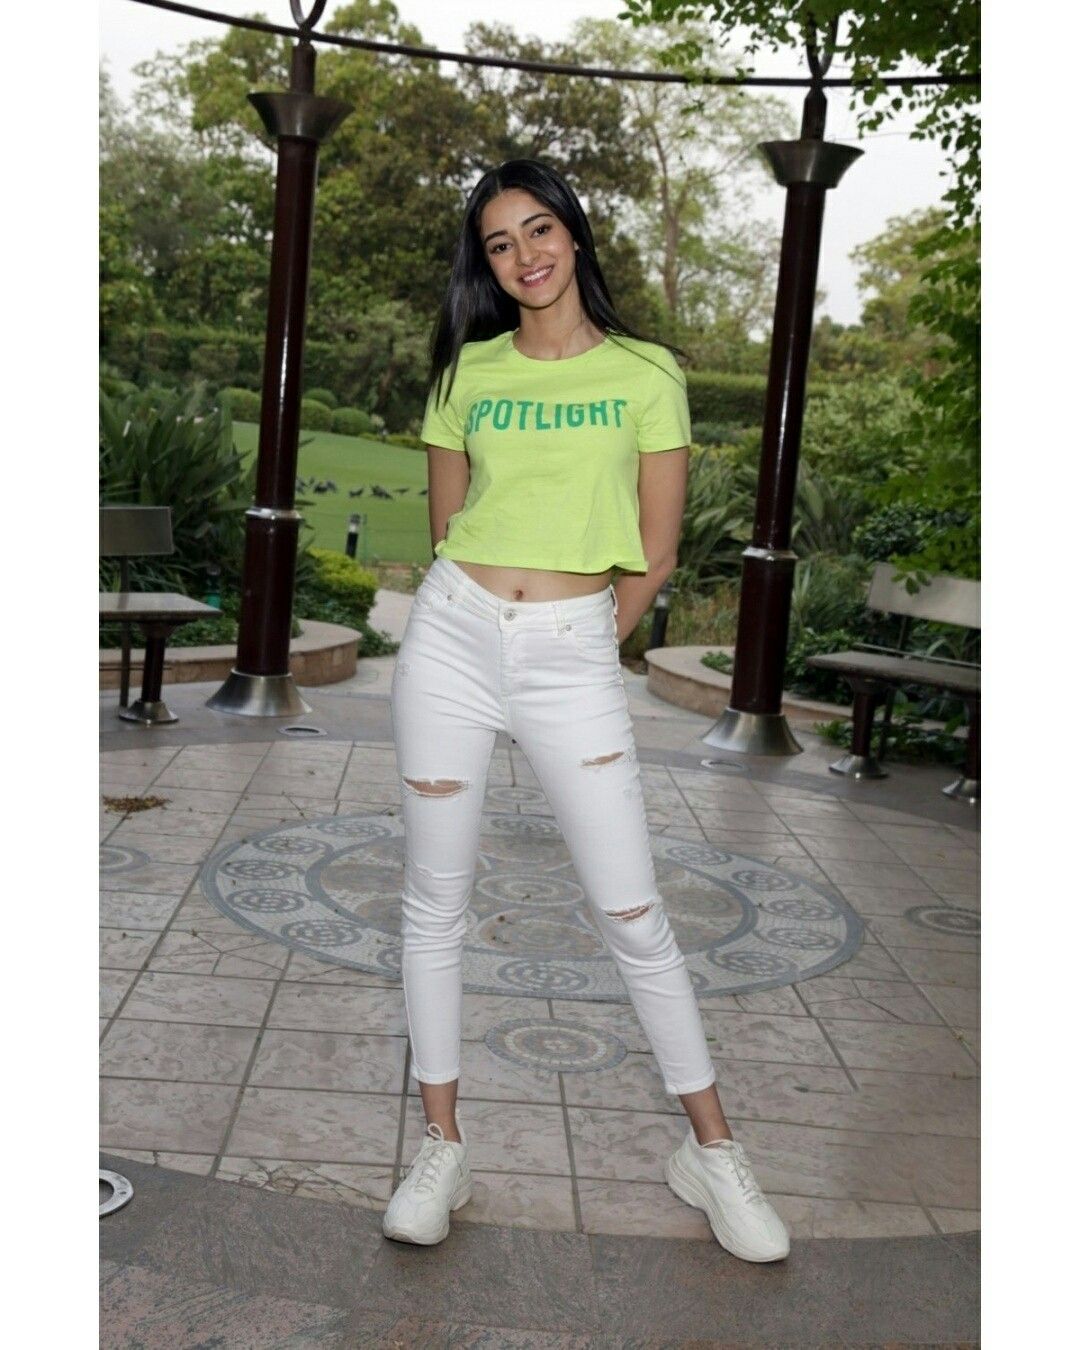 Ananya Pandey sizzles in Green for a Photoshoot